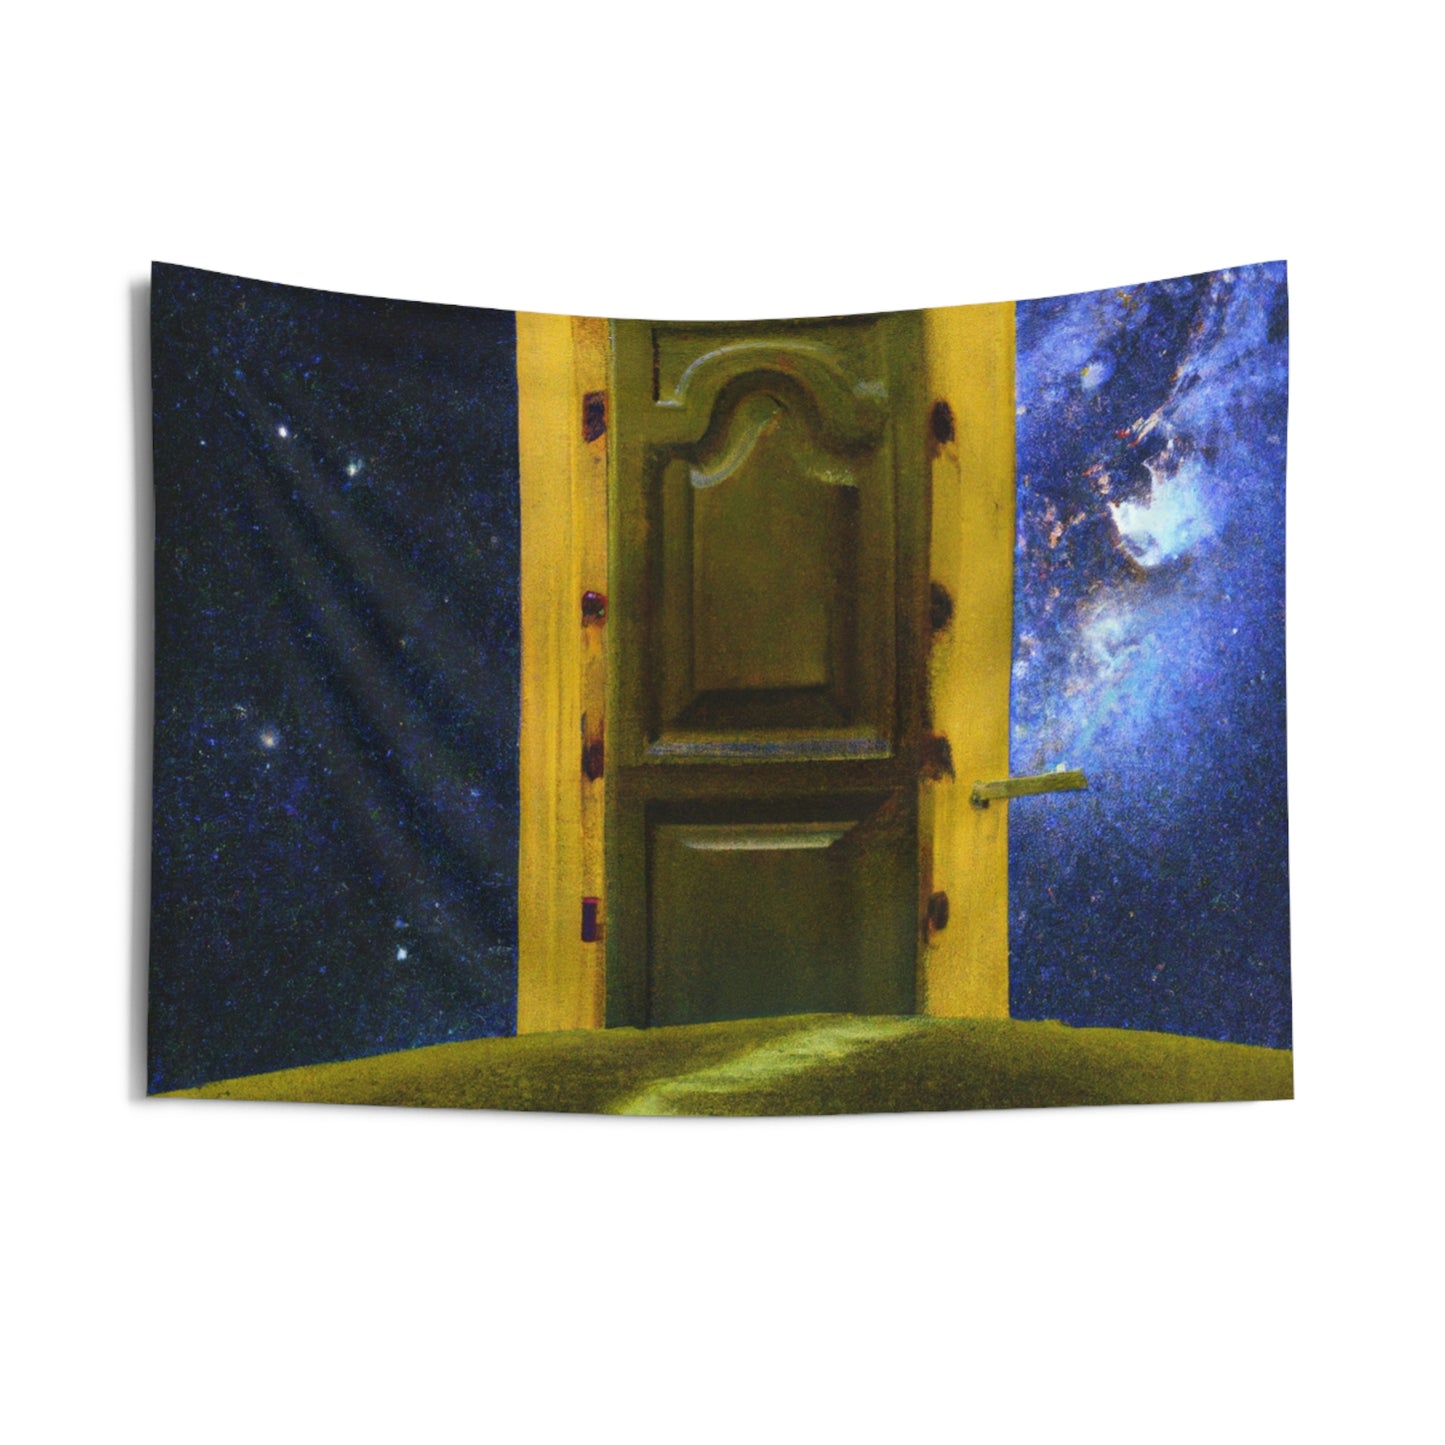 The Heavenly Threshold - The Alien Wall Tapestries